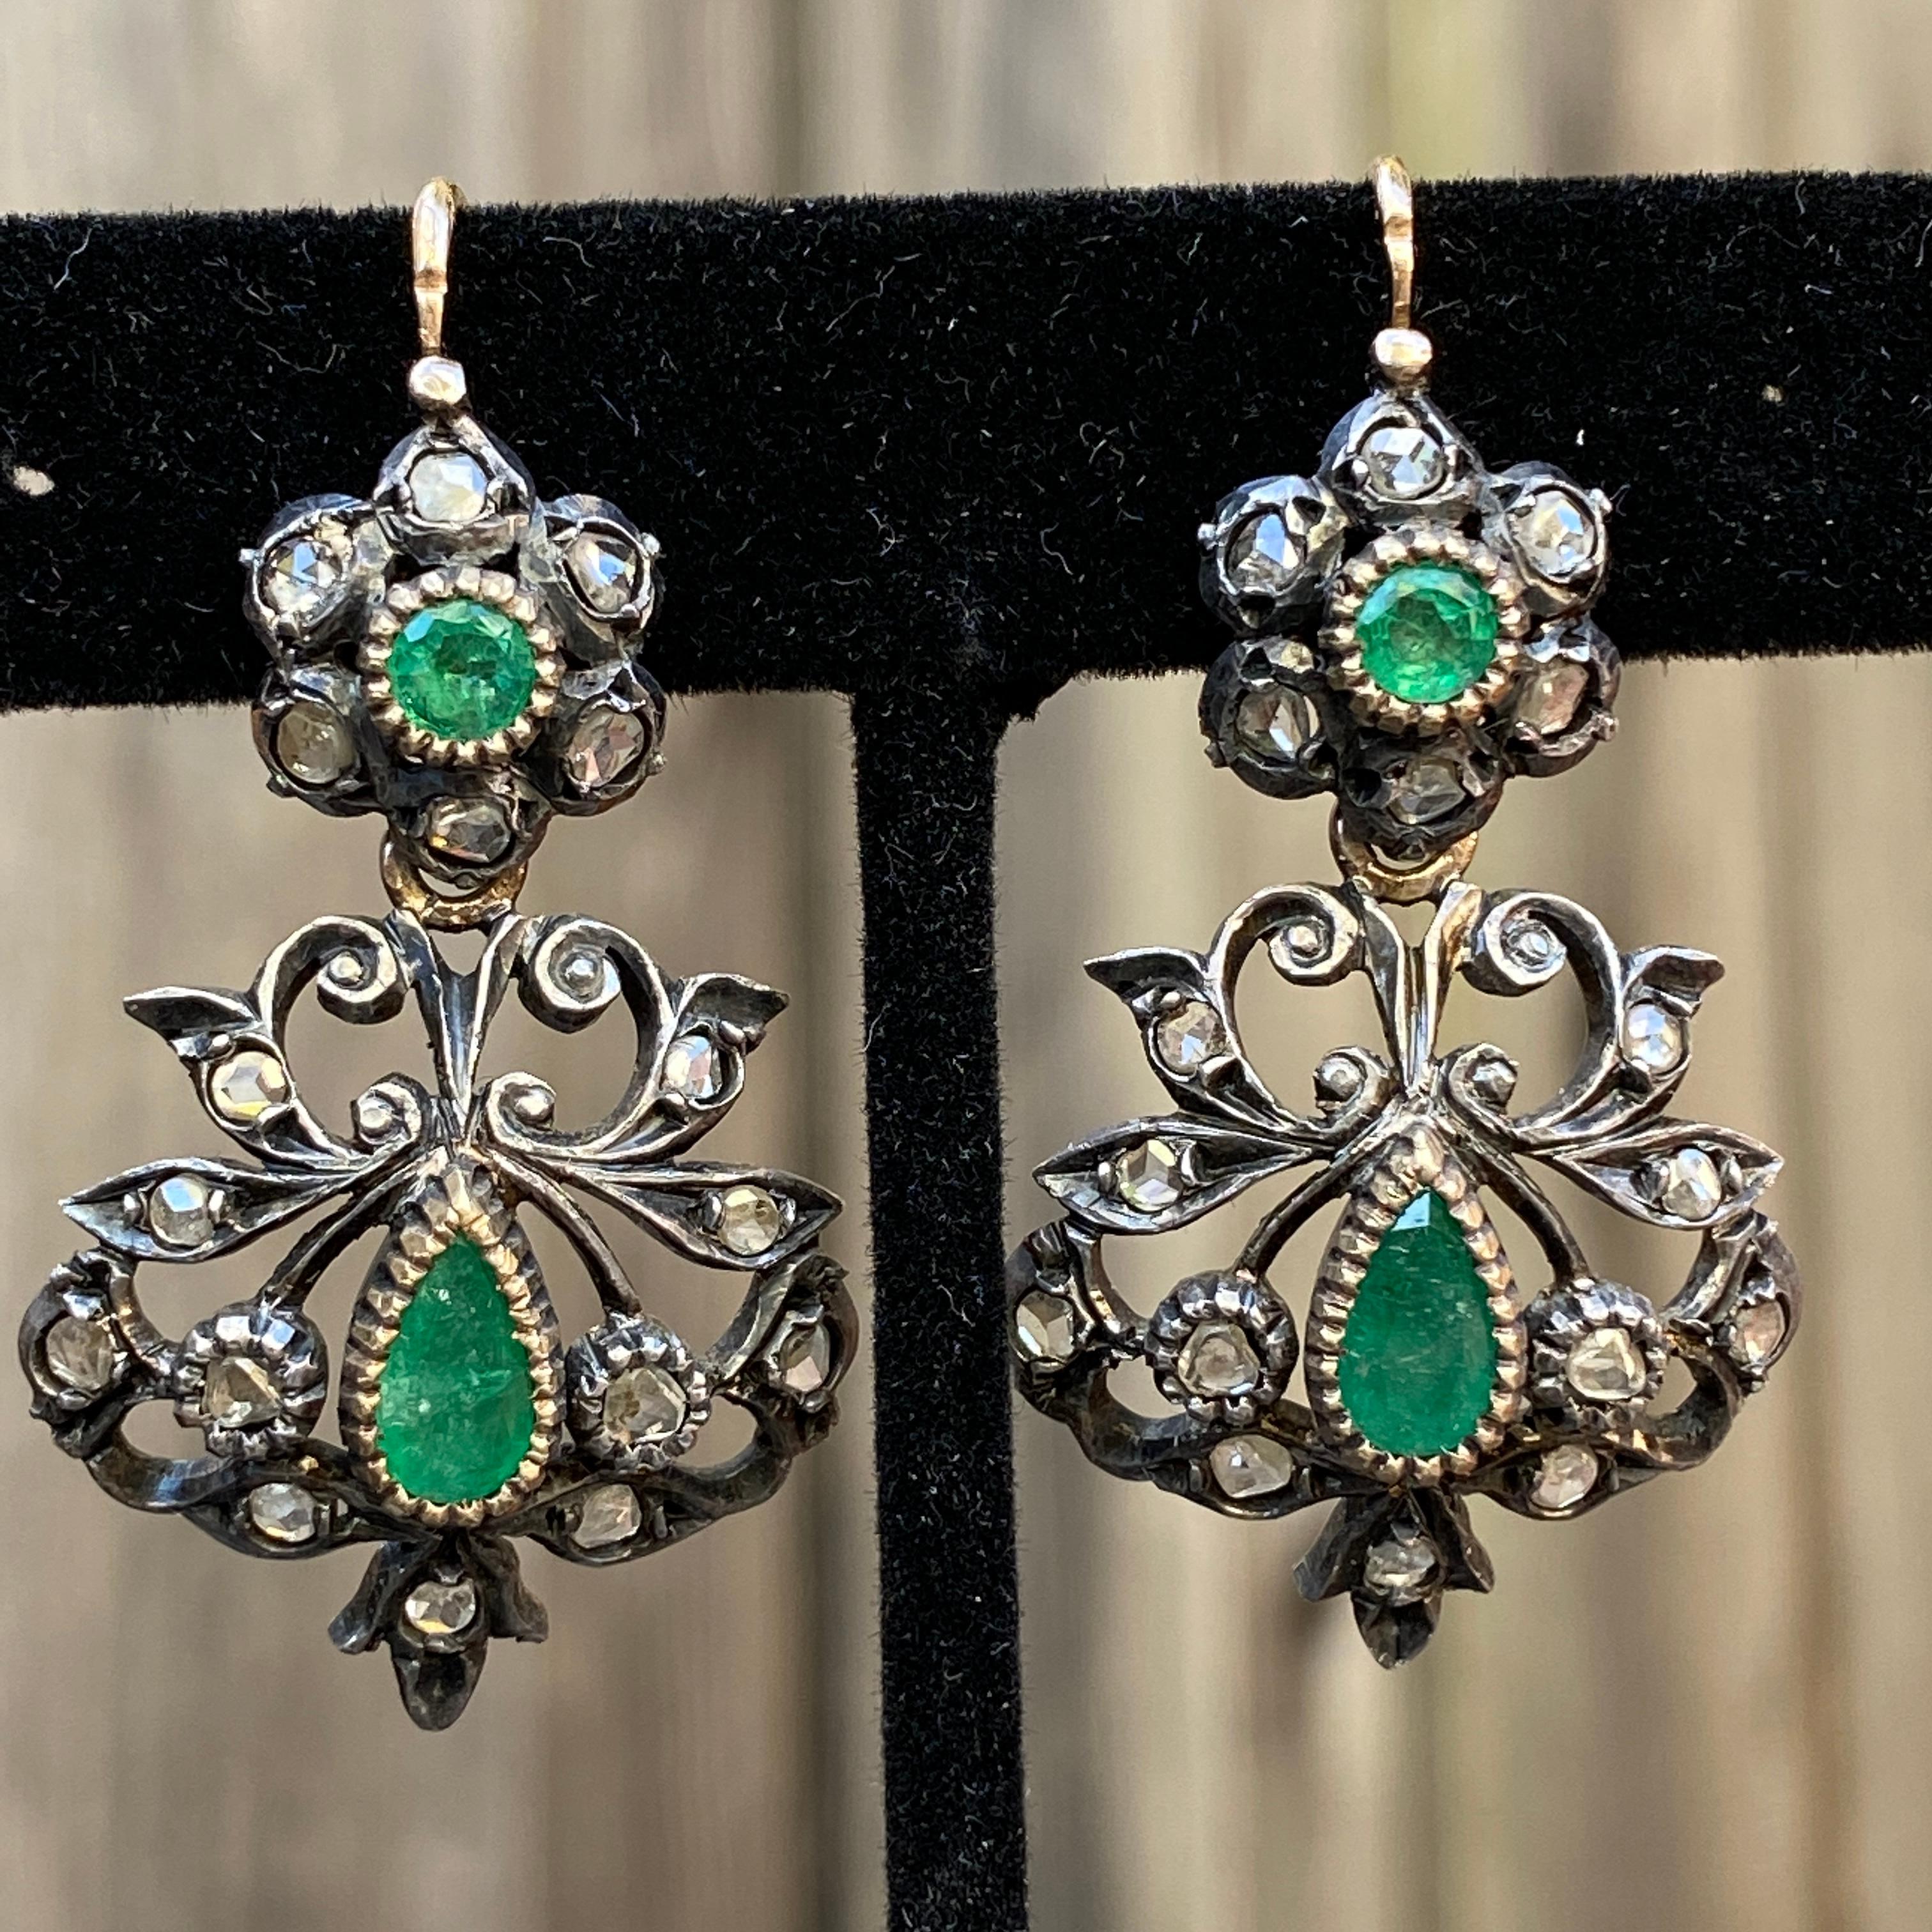 Details:
Victorian Day and Night Earrings with natural emeralds and rose cut diamonds! Originally termed as 